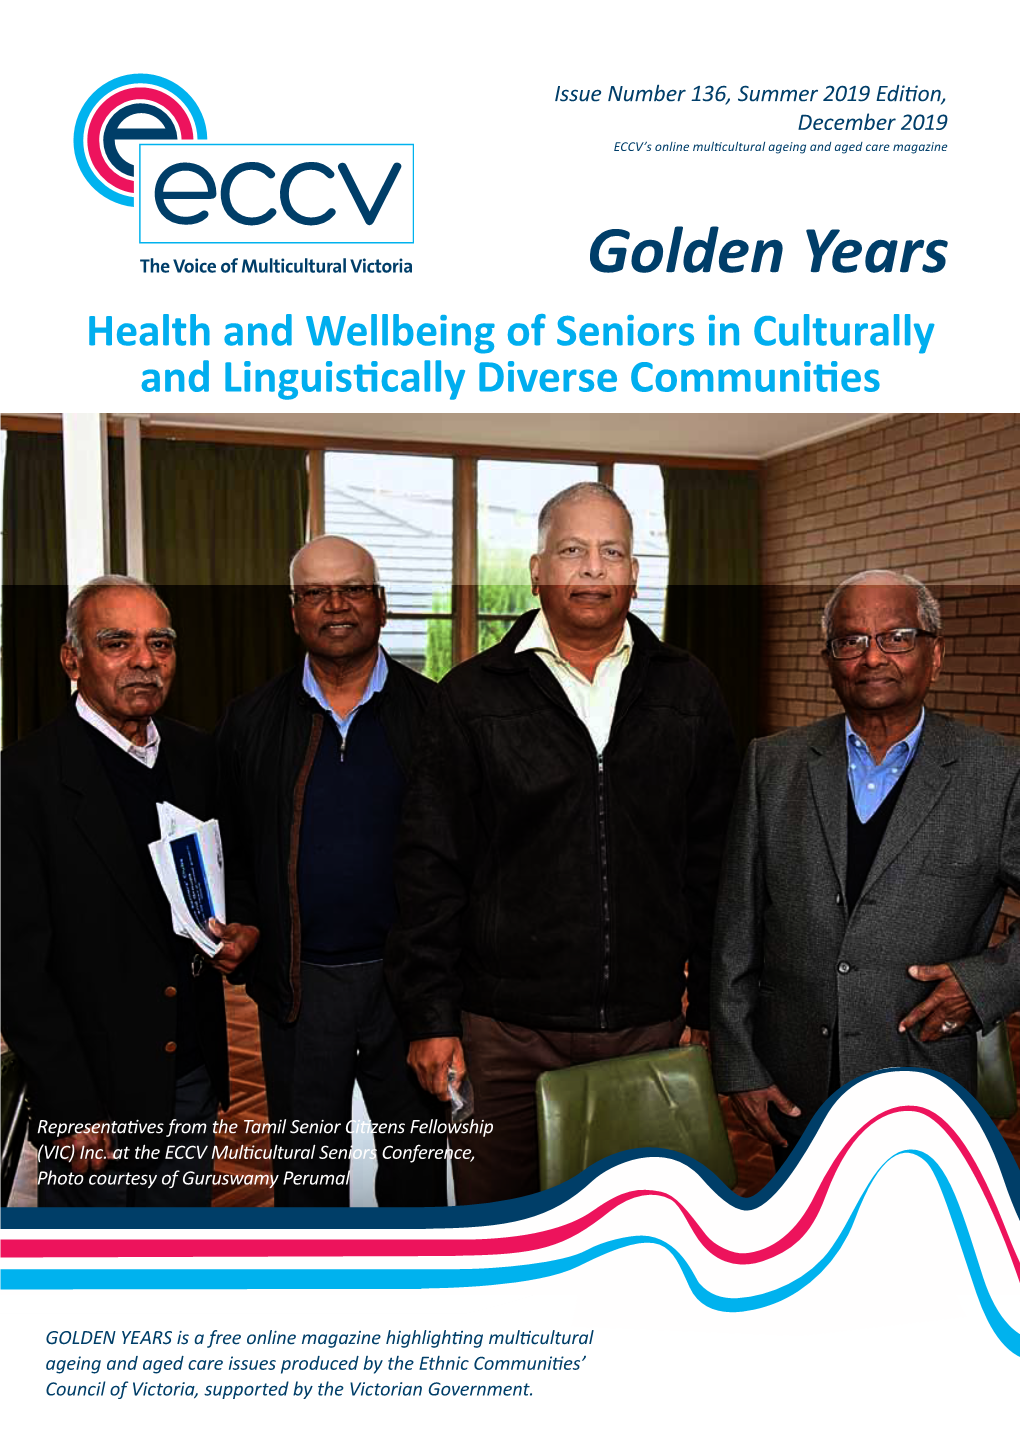 Health and Wellbeing of Seniors in Culturally and Linguistically Diverse Communities